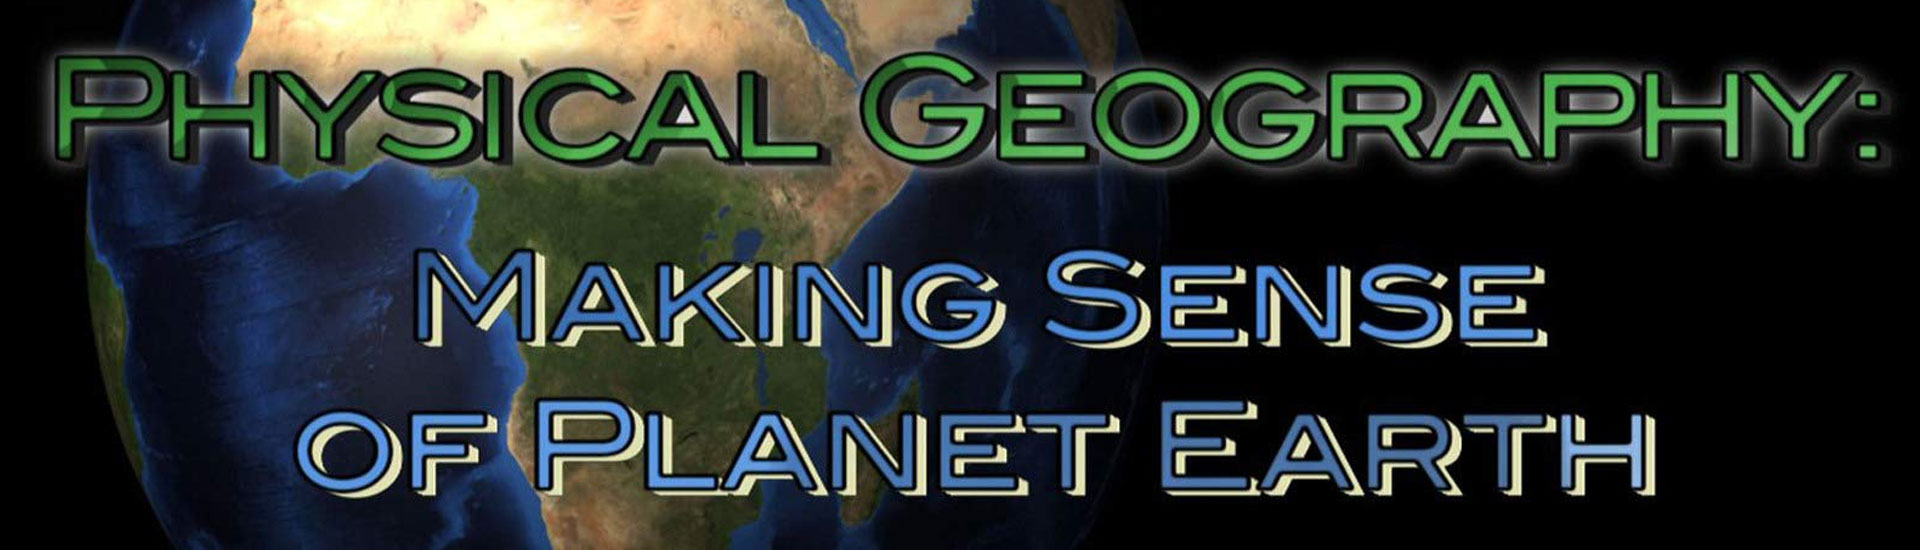 Physical Geography: Making Sense of Planet Earth